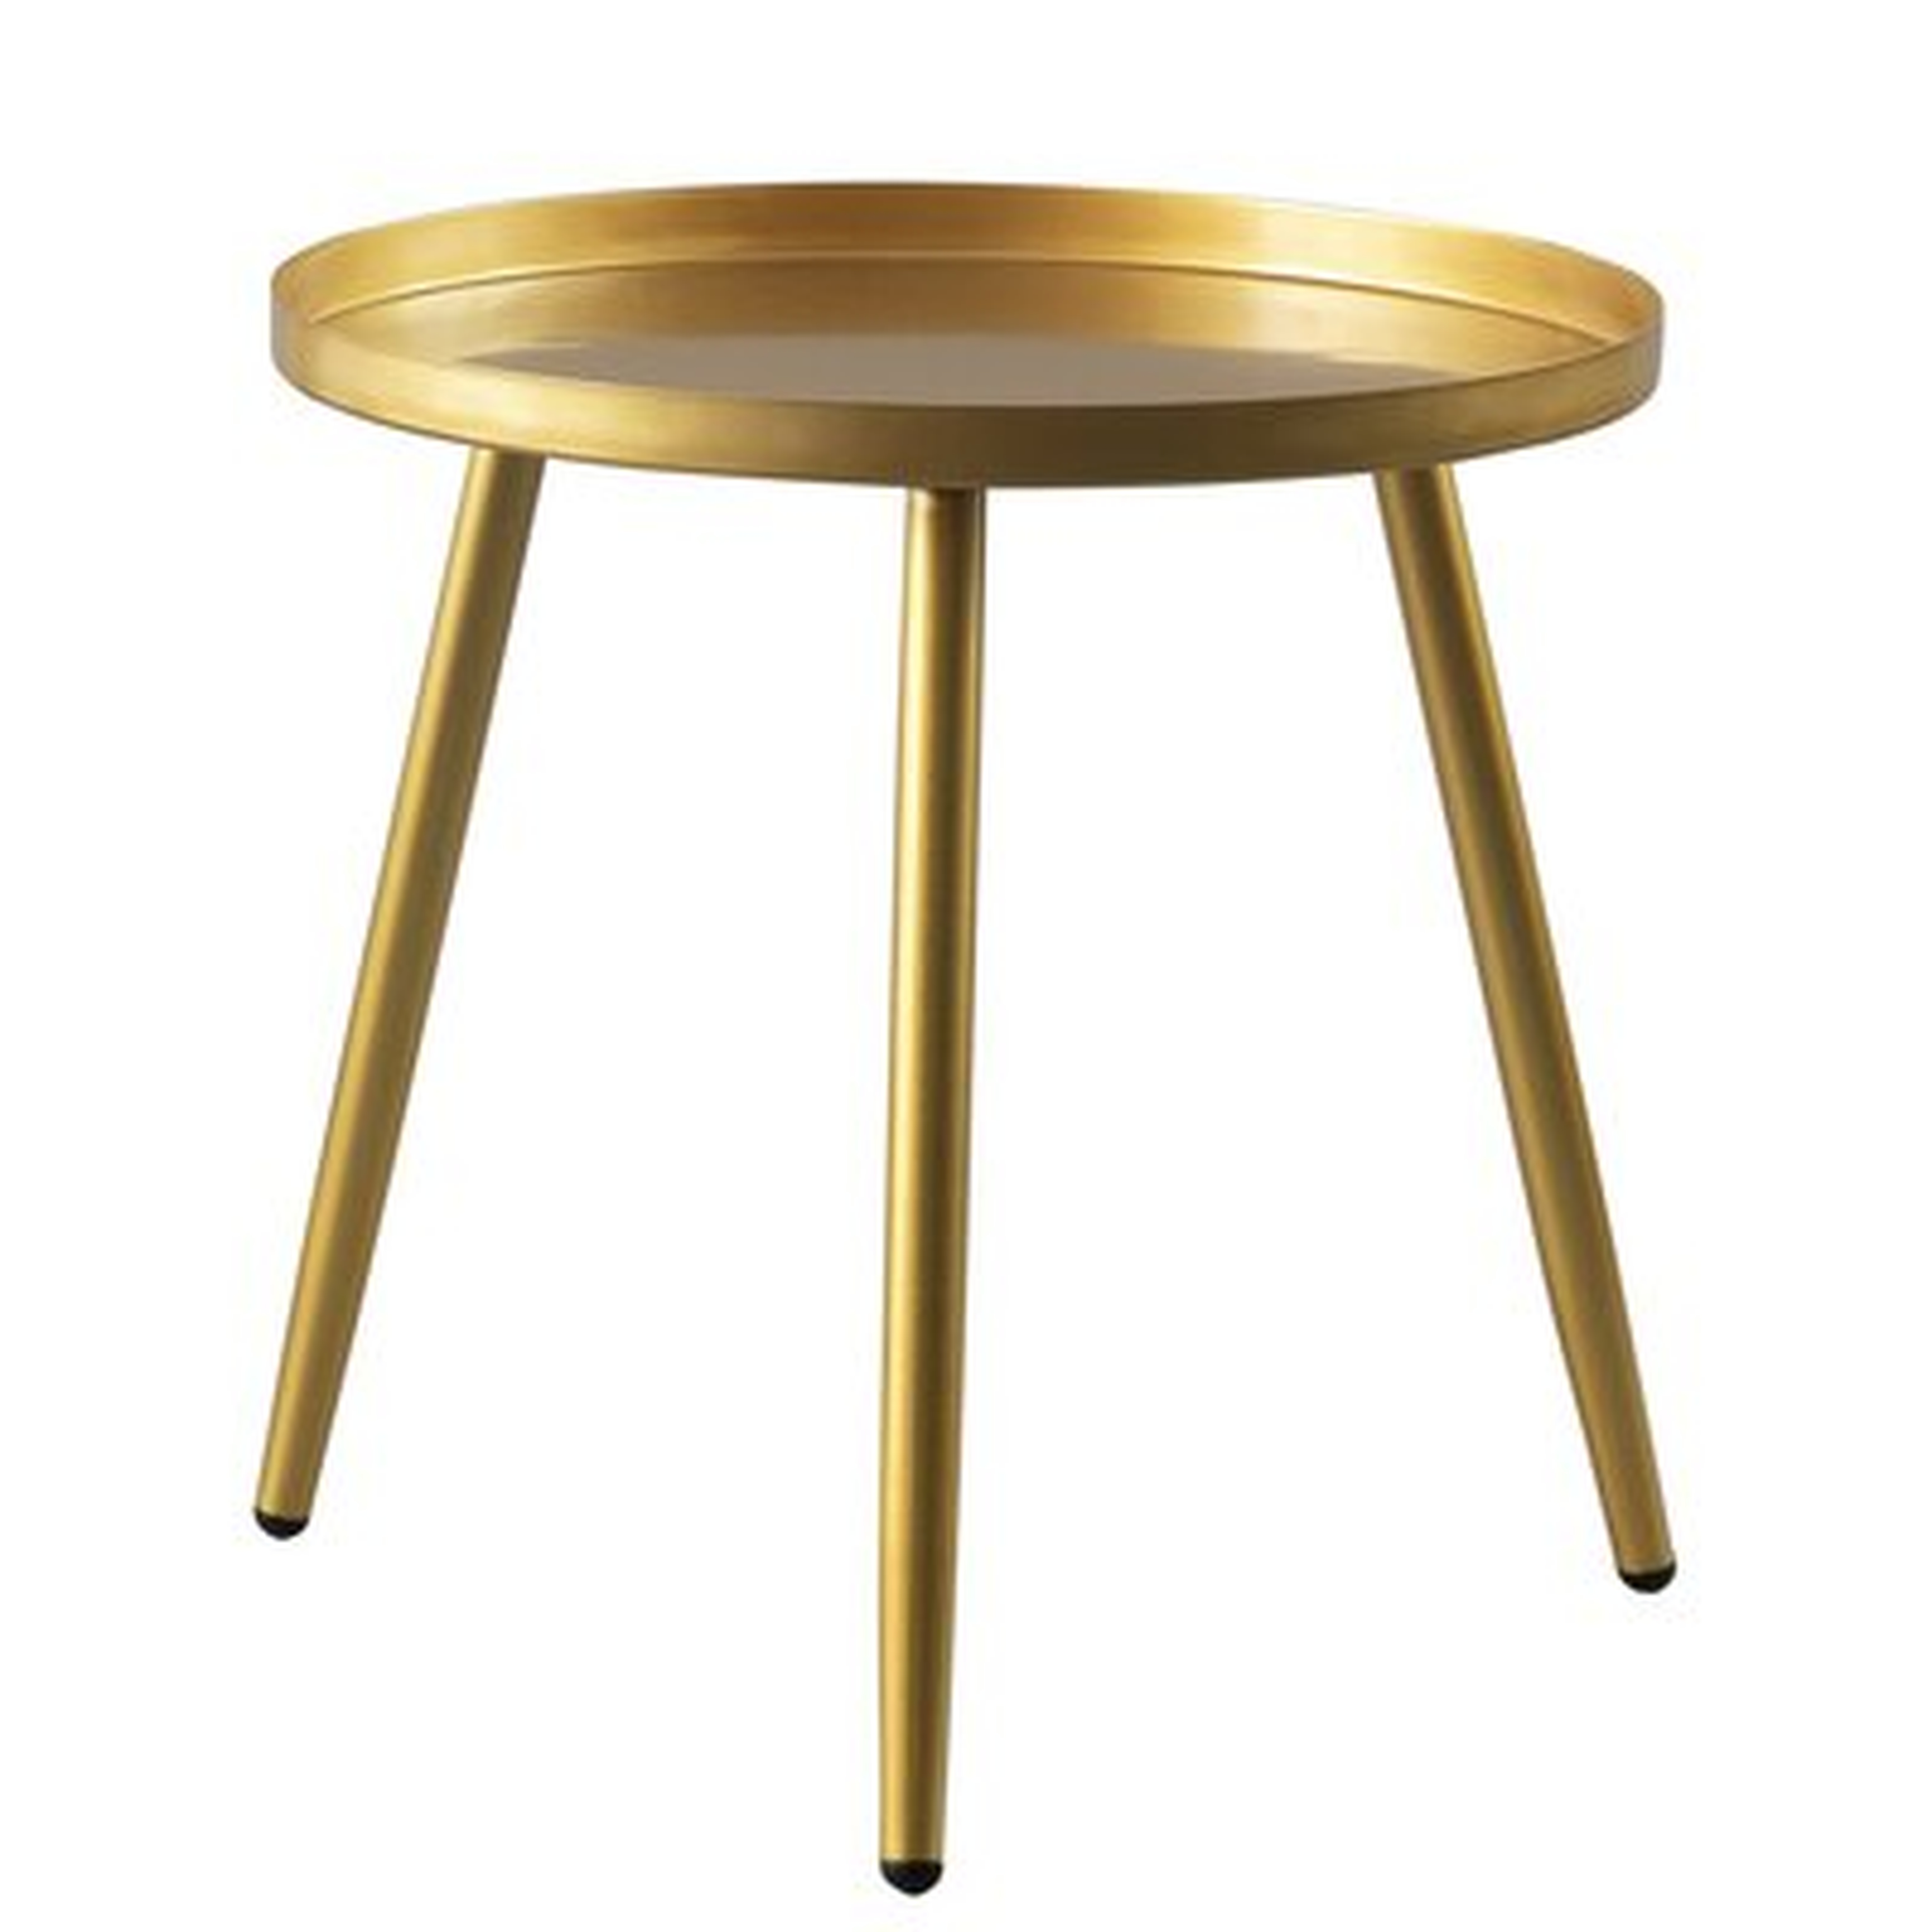 End Tables For Small Spaces,Small Side Table Living Room,Gold Side Table Side Table Metal End Table - Wayfair